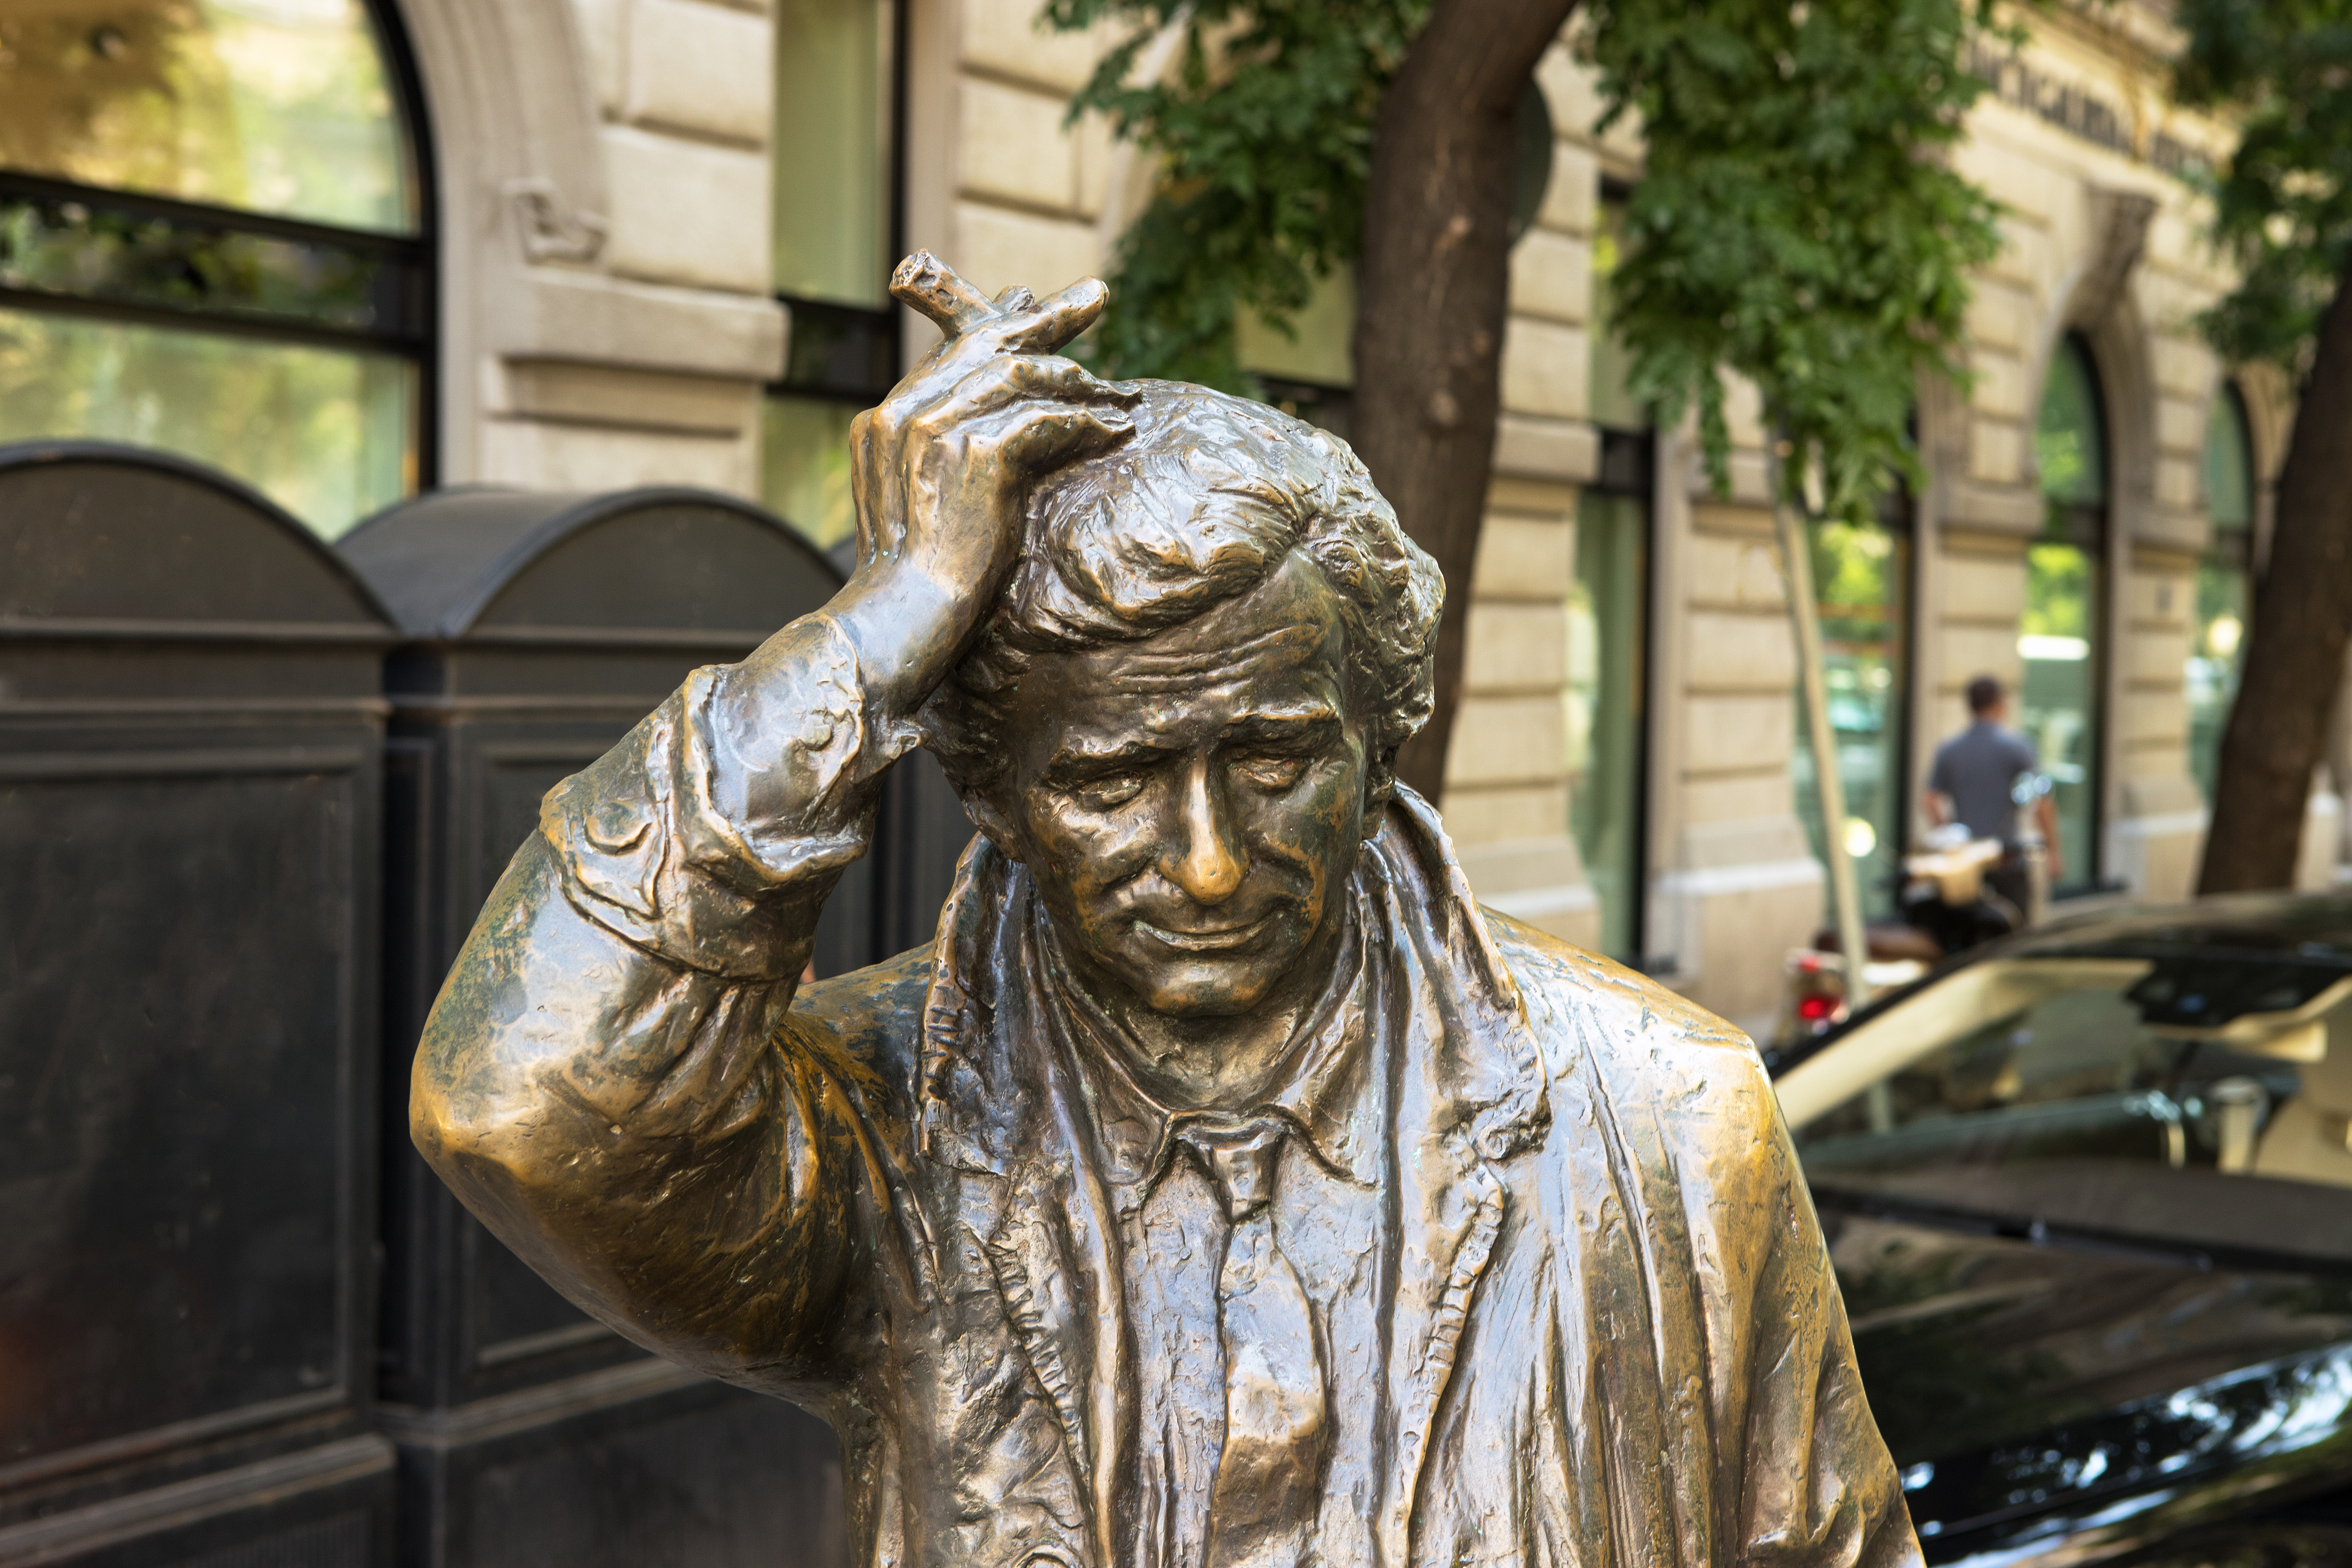 Statue of Peter Falk in Budapest, Hungary. | Source: Shutterstock